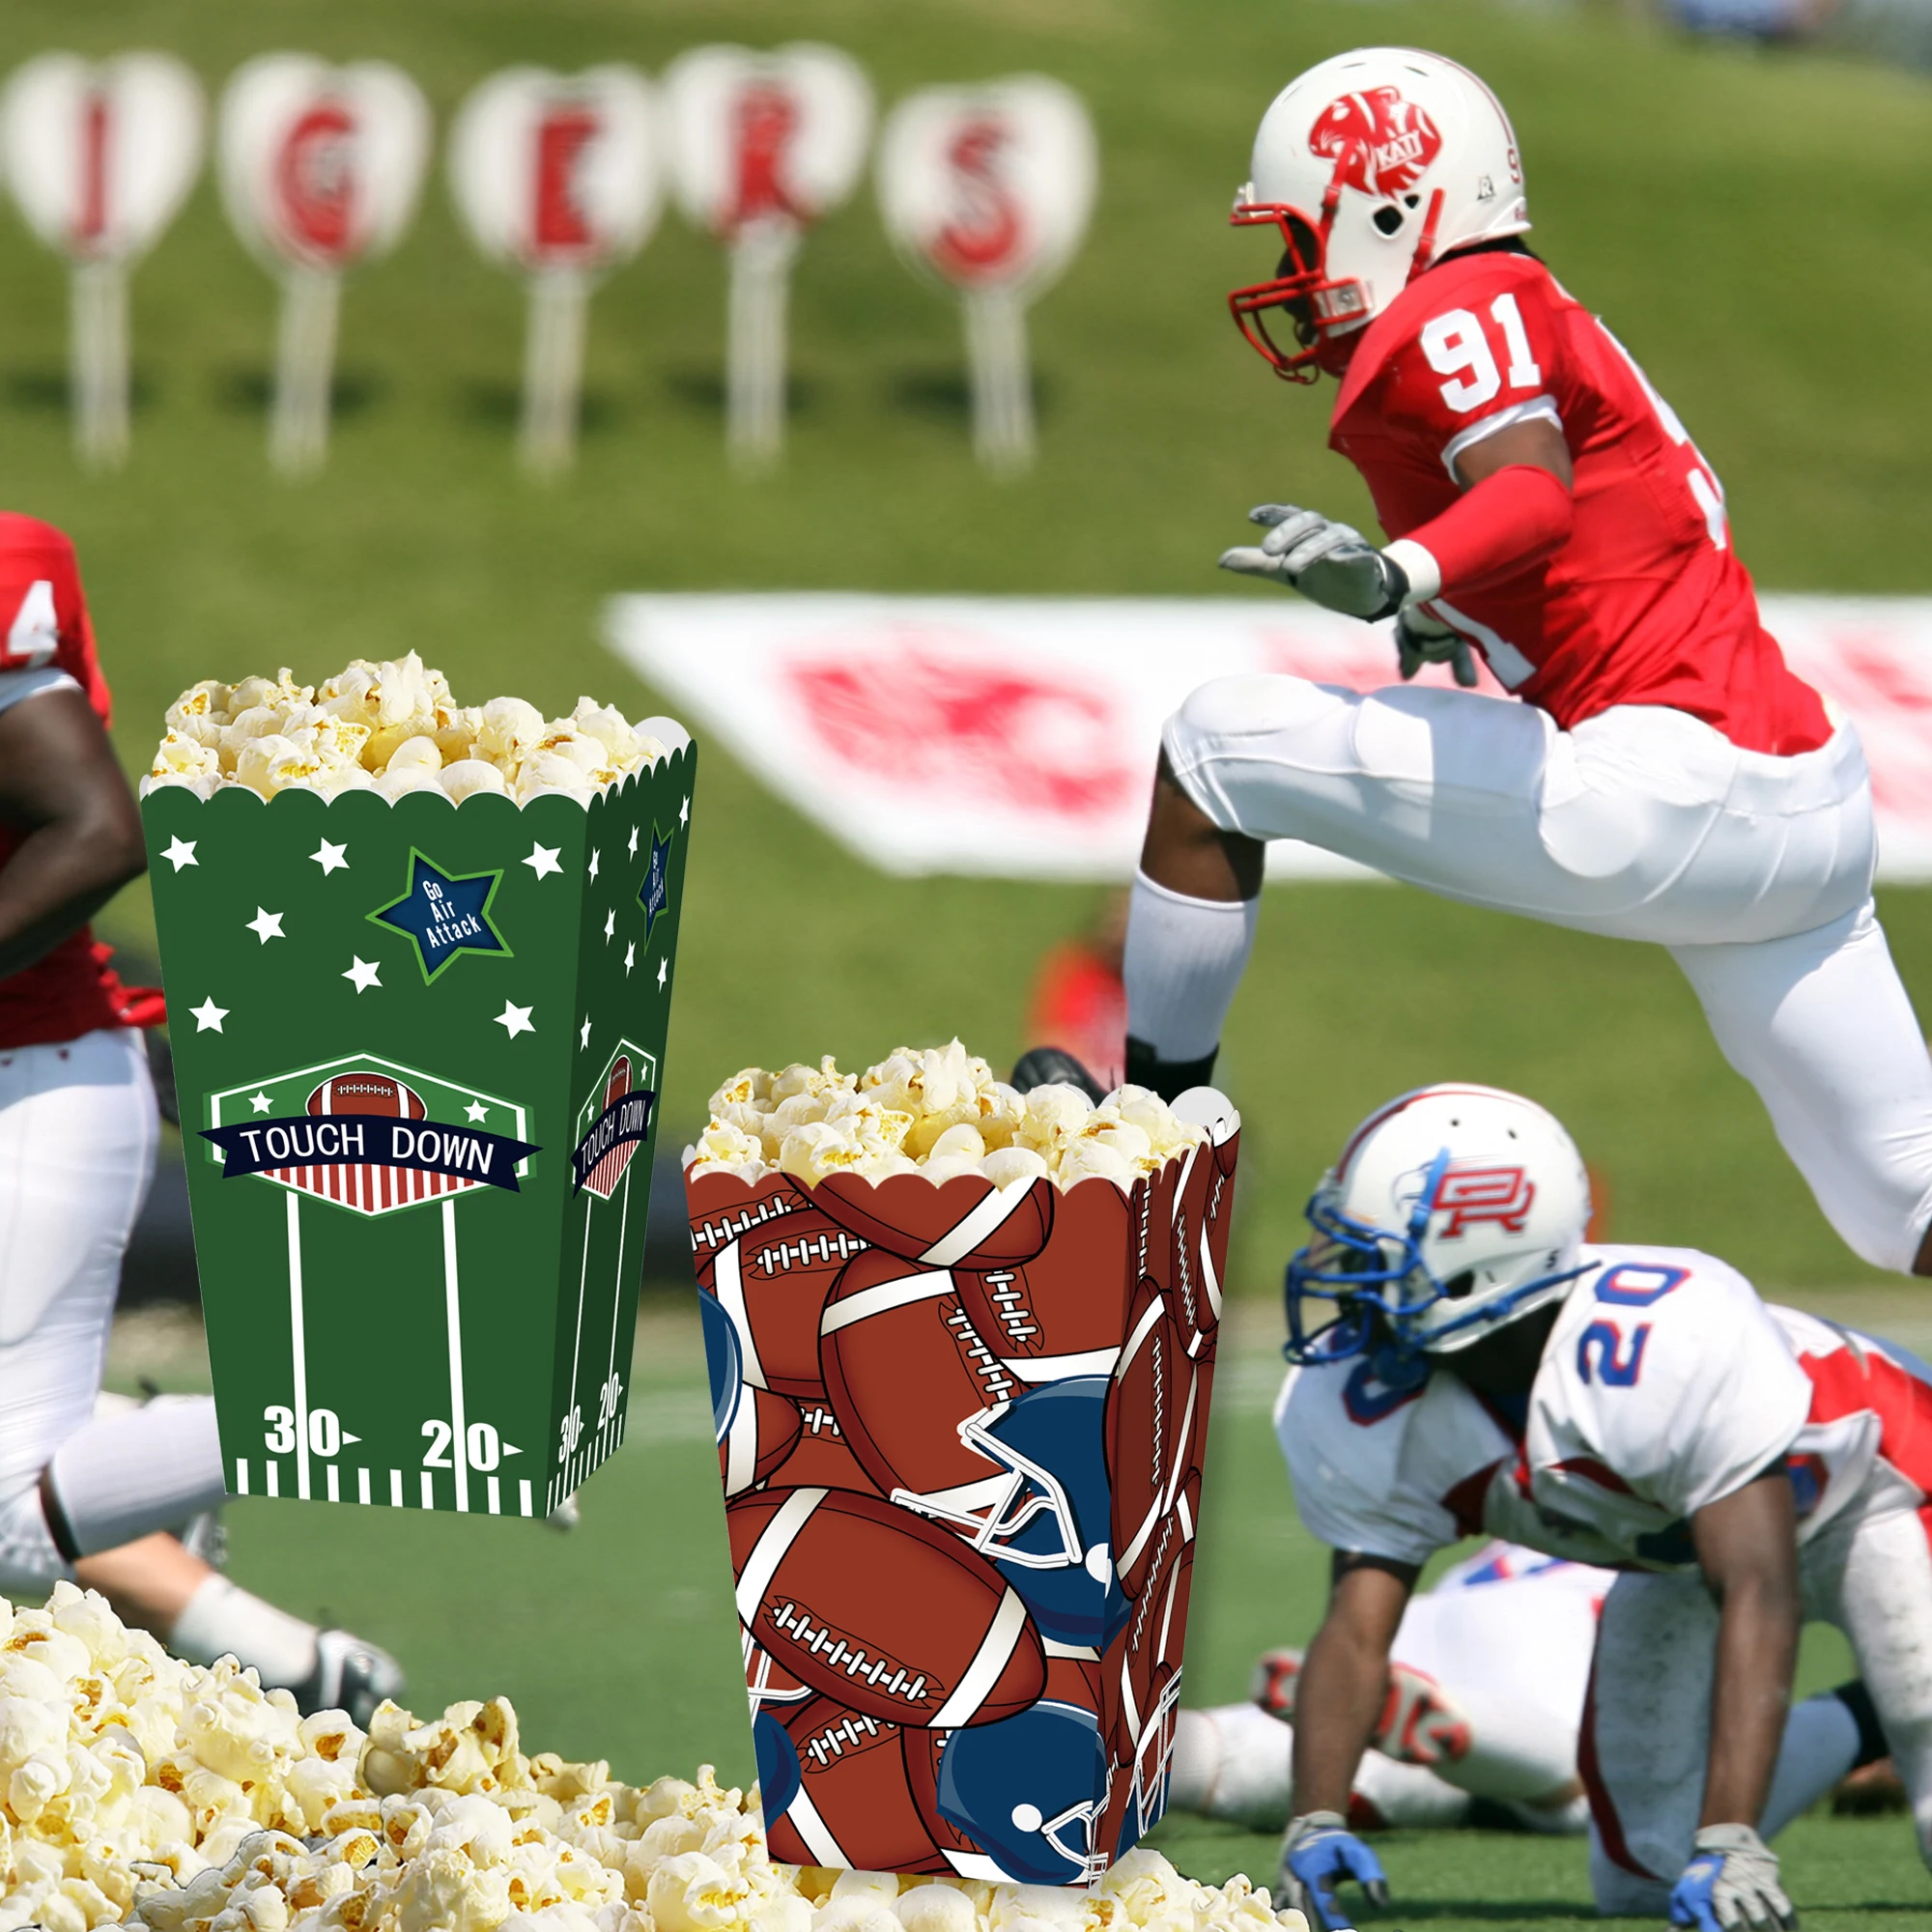 BM003 12Pcs American Football Sports Rugby Theme Popcorn Box Kids Birthday Party Supplies Paper Baby Shower Gift Boxes - купить по